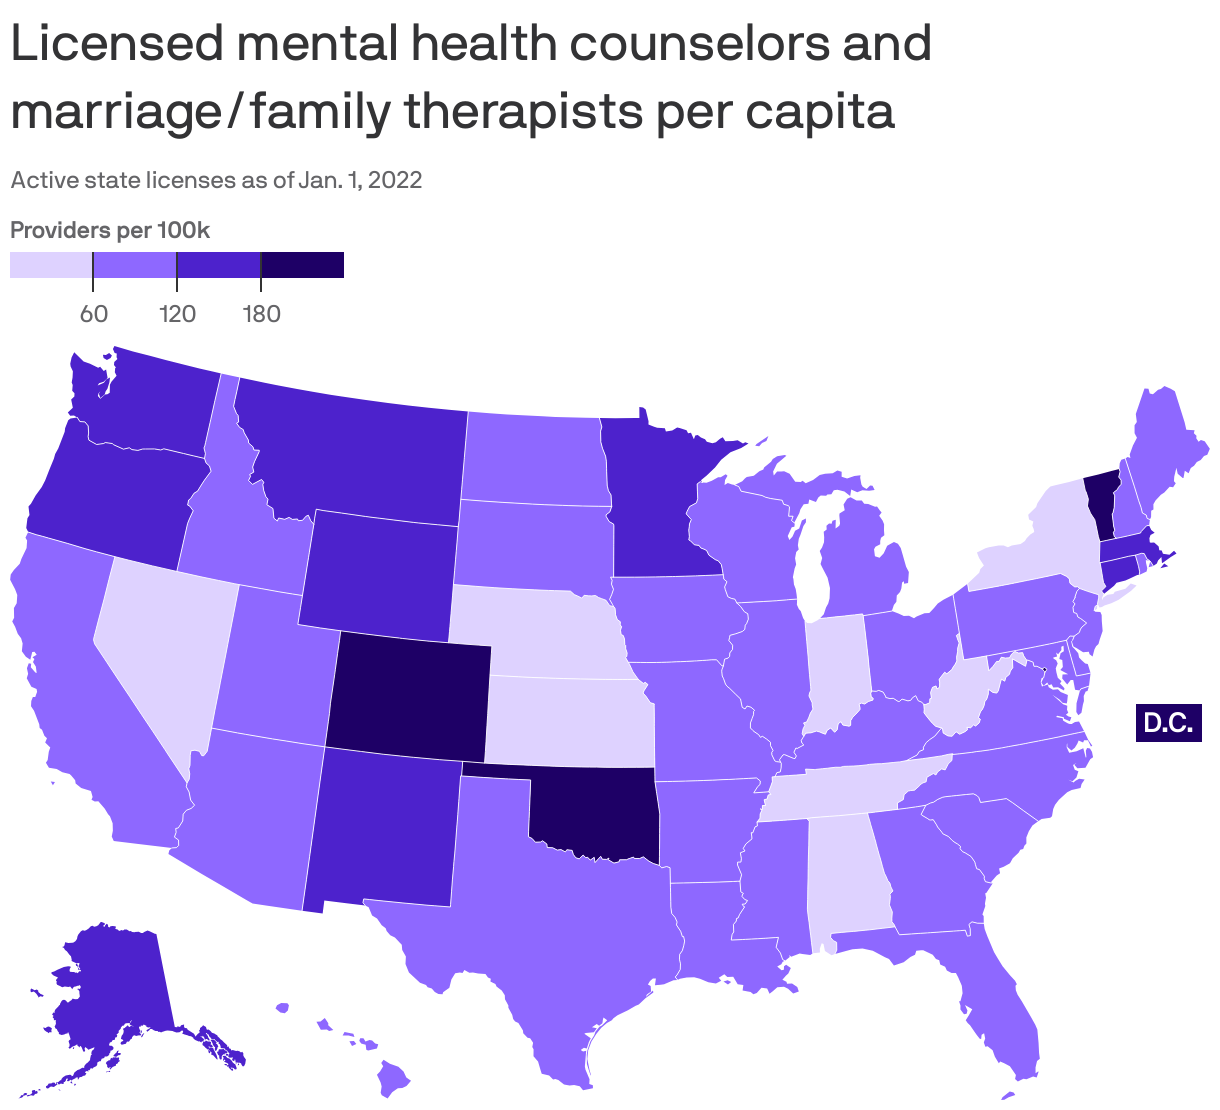 Licensed mental health counselors and marriage/family therapists per capita